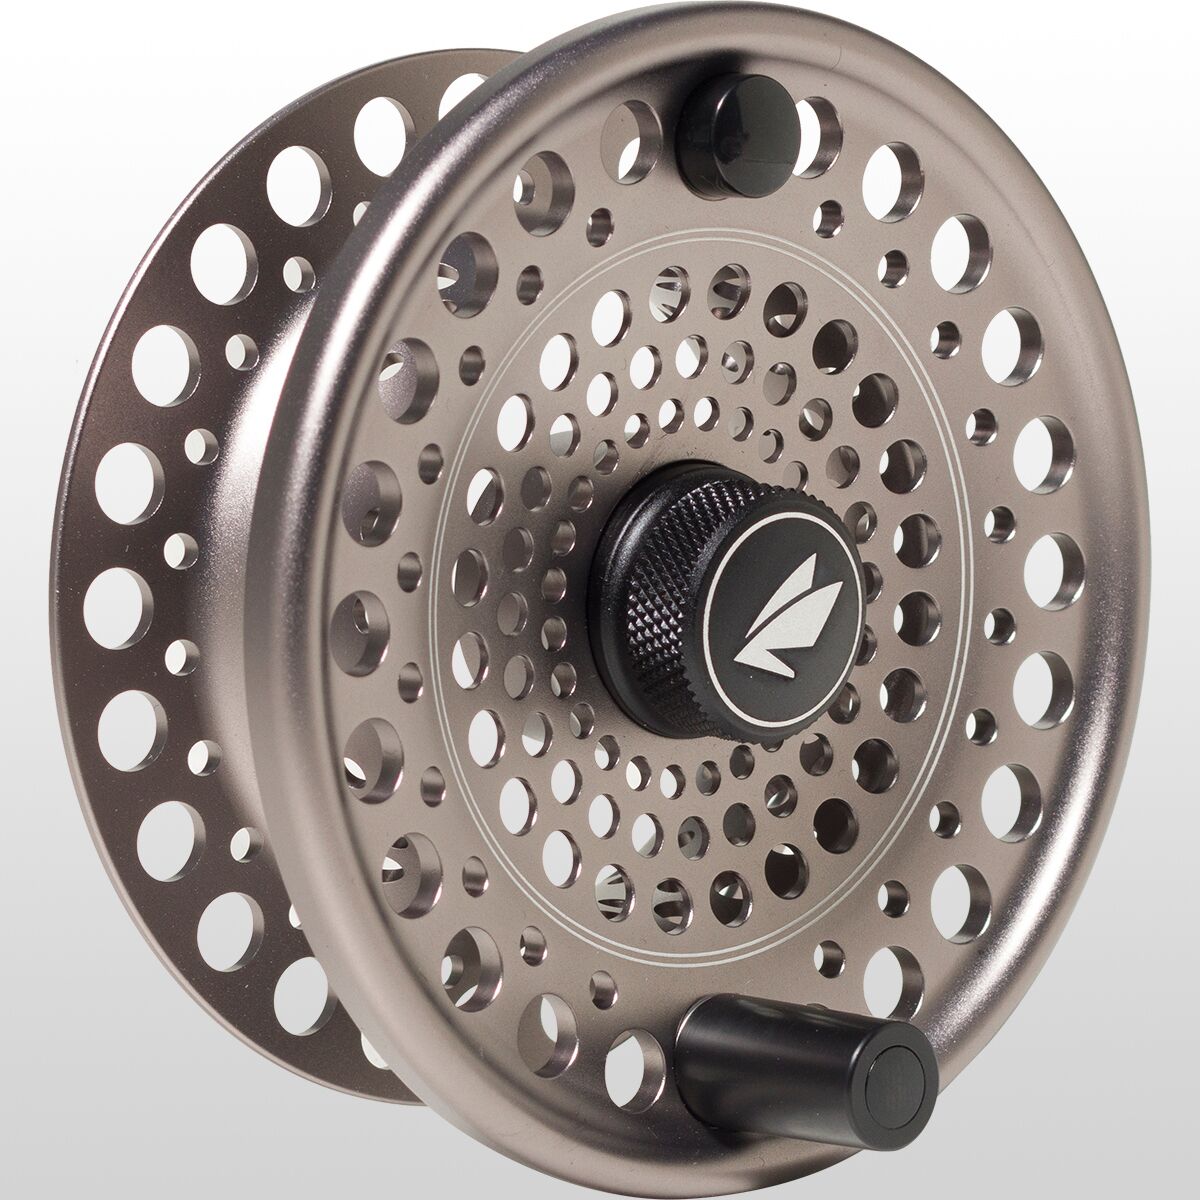 Sage Trout 1/2/3 Spey Fly Reel Bronze